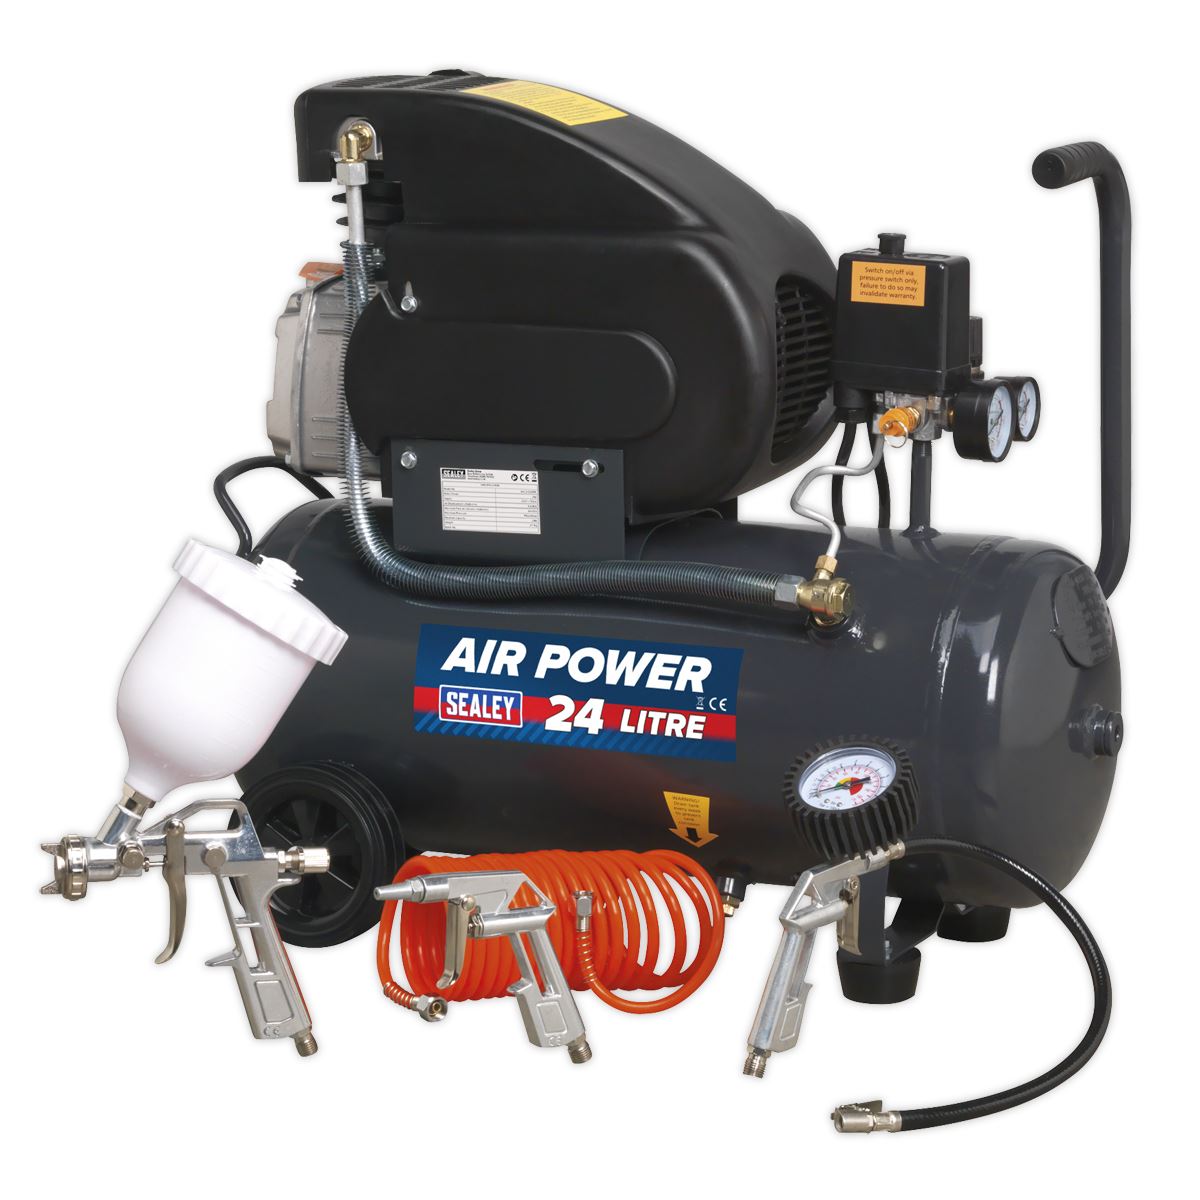 Sealey Air Compressor 24L Direct Drive 2hp with 4pc Air Accessory Kit